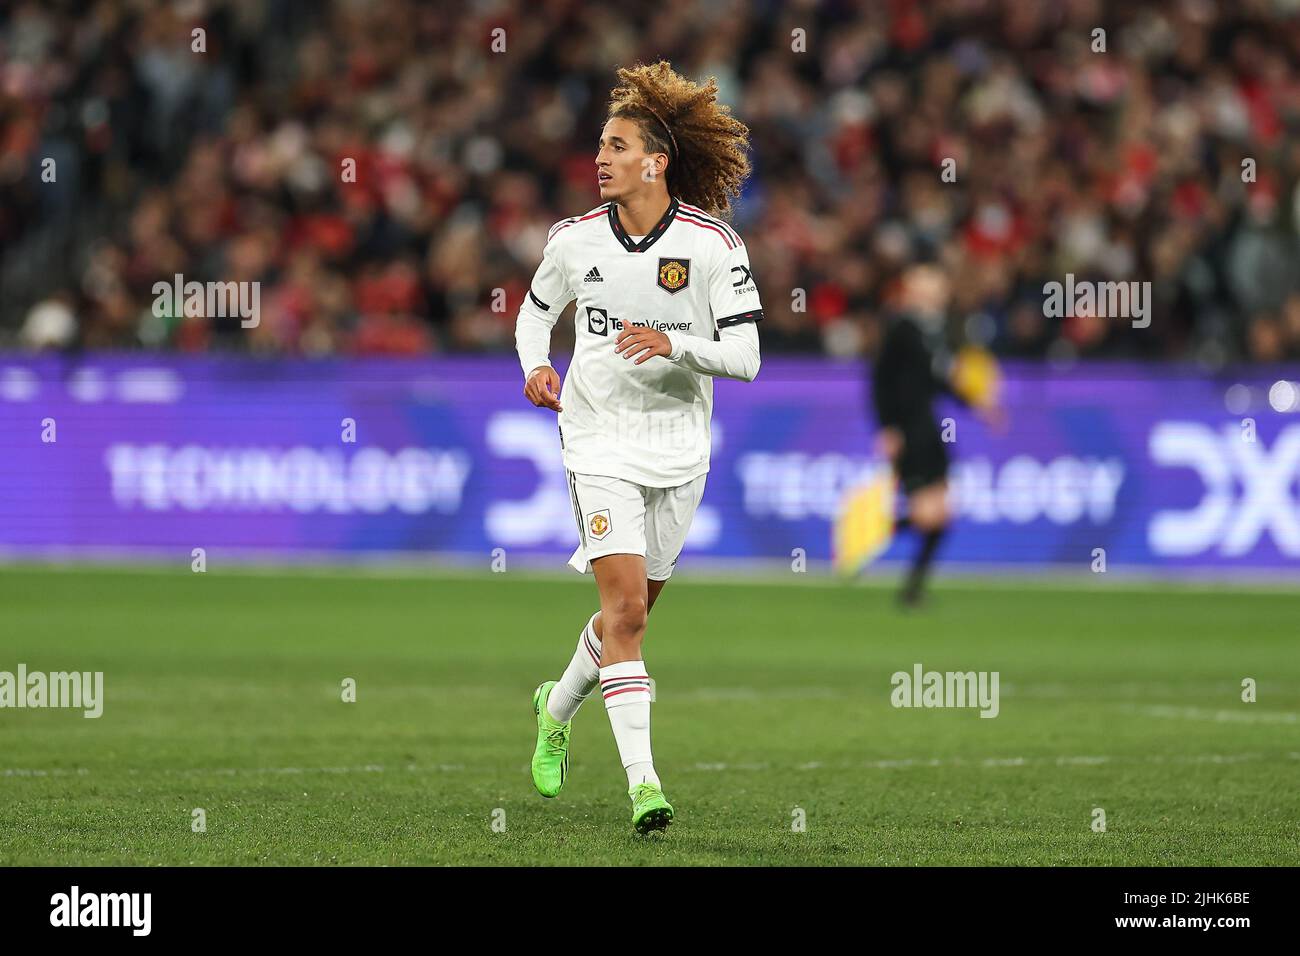 Hannibal Mejbri (46) of Manchester United in action during the game Stock Photo